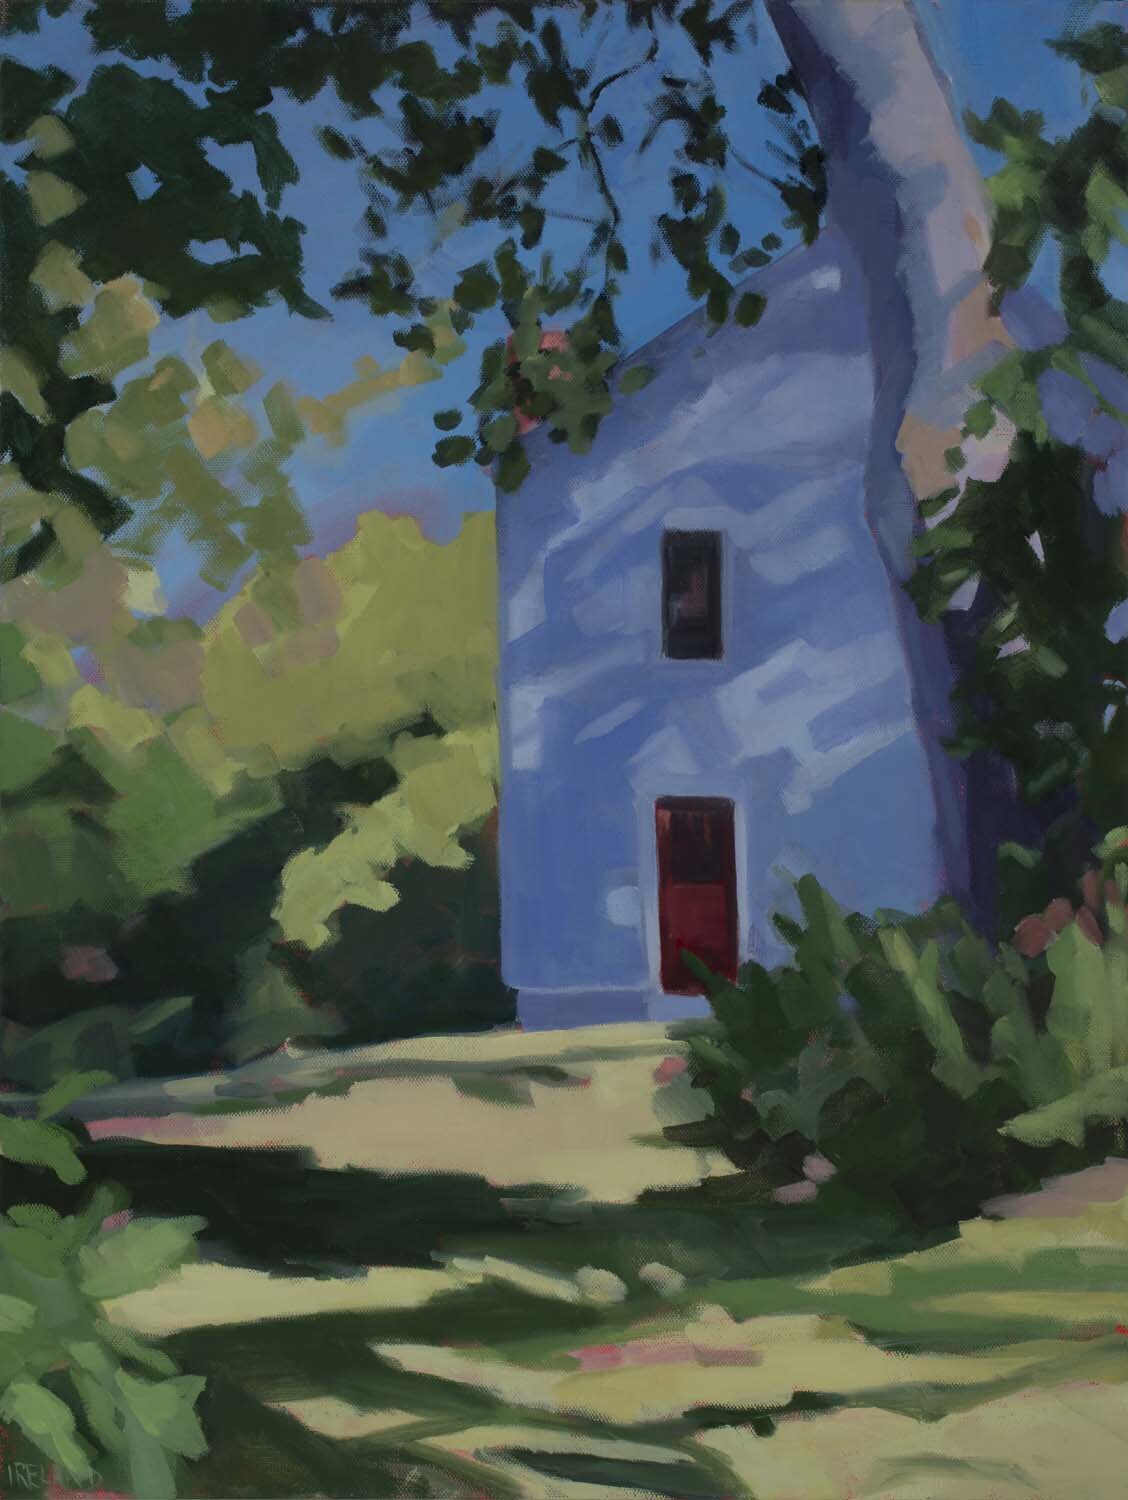    Side Door , 2020   Oil on canvas  20 x 14 inches 